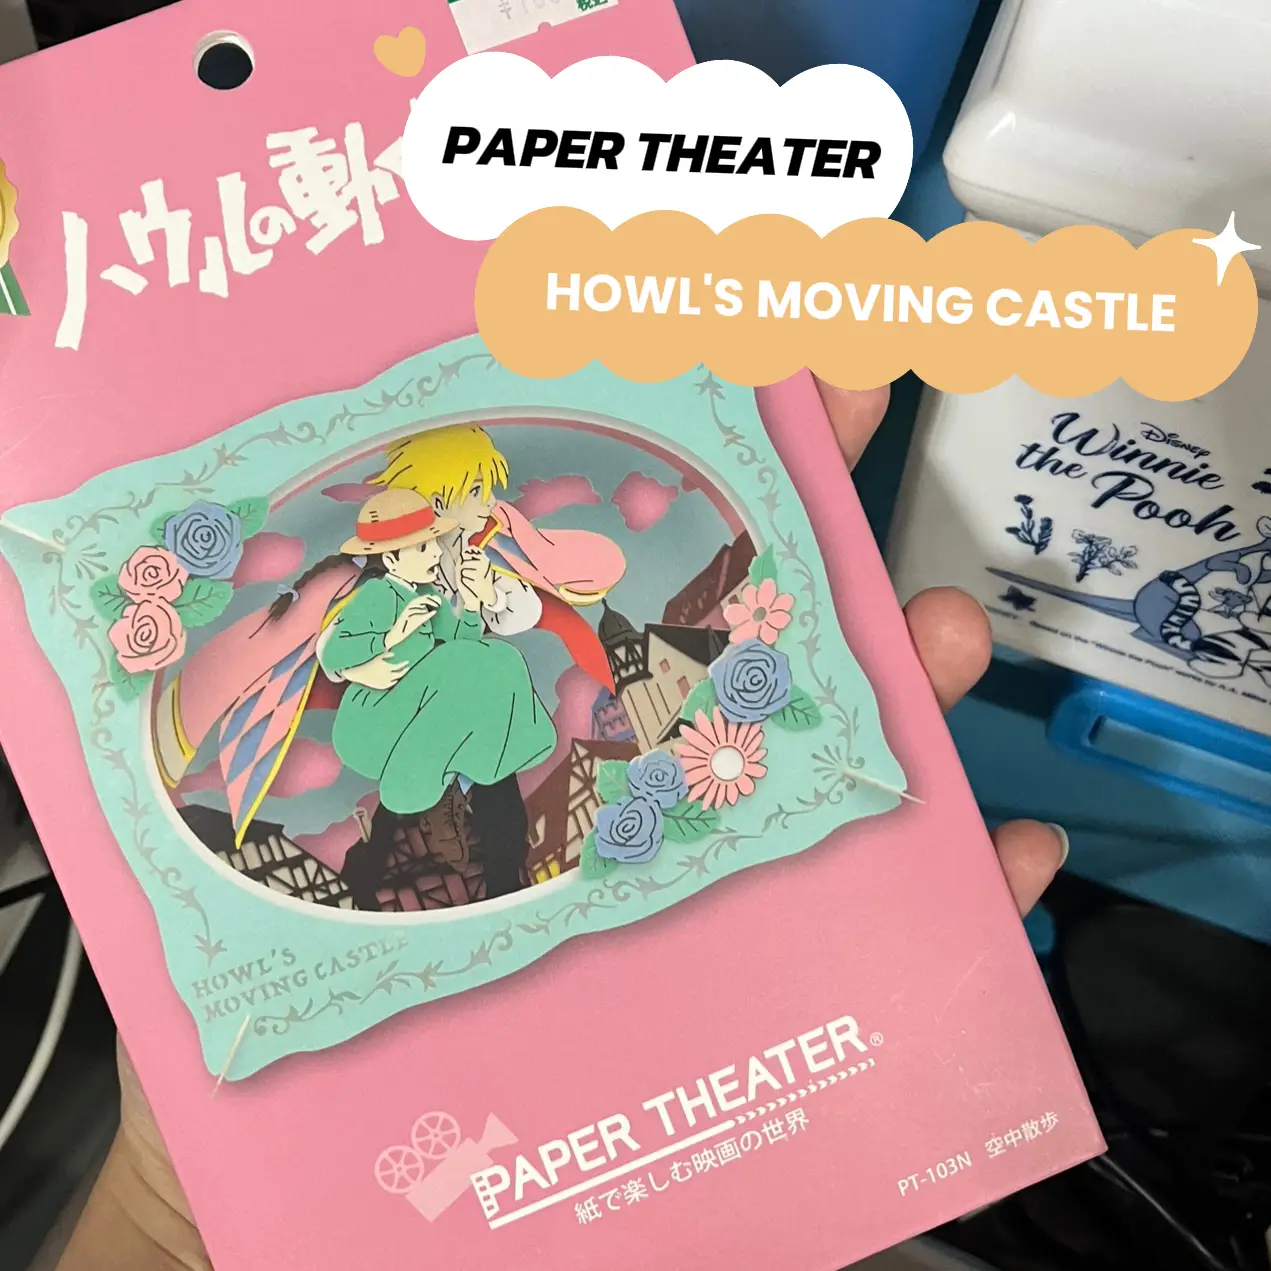 Paper Theater, Howl's Moving Castle